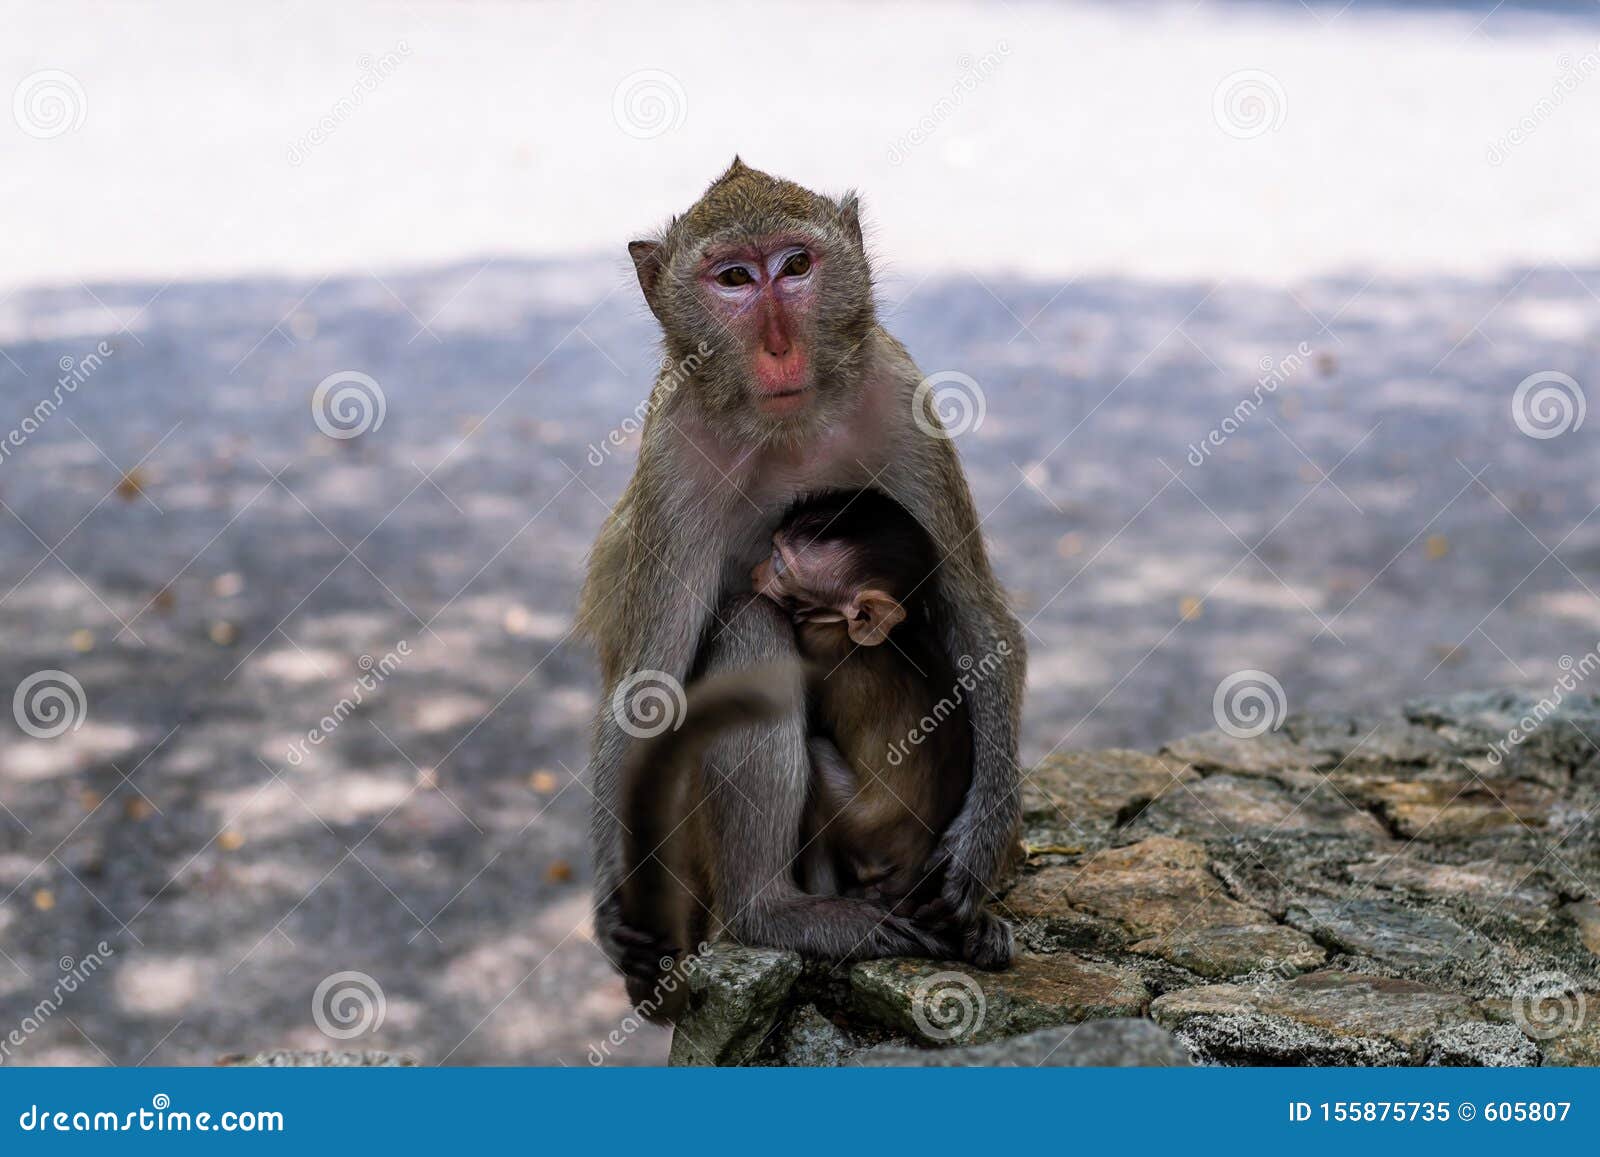 Baby Monkey Eating Milk From The Mother A Family Of Monkeys The Concept Of Animals At The Zoo In Thailand Stock Image Image Of Macaque Love